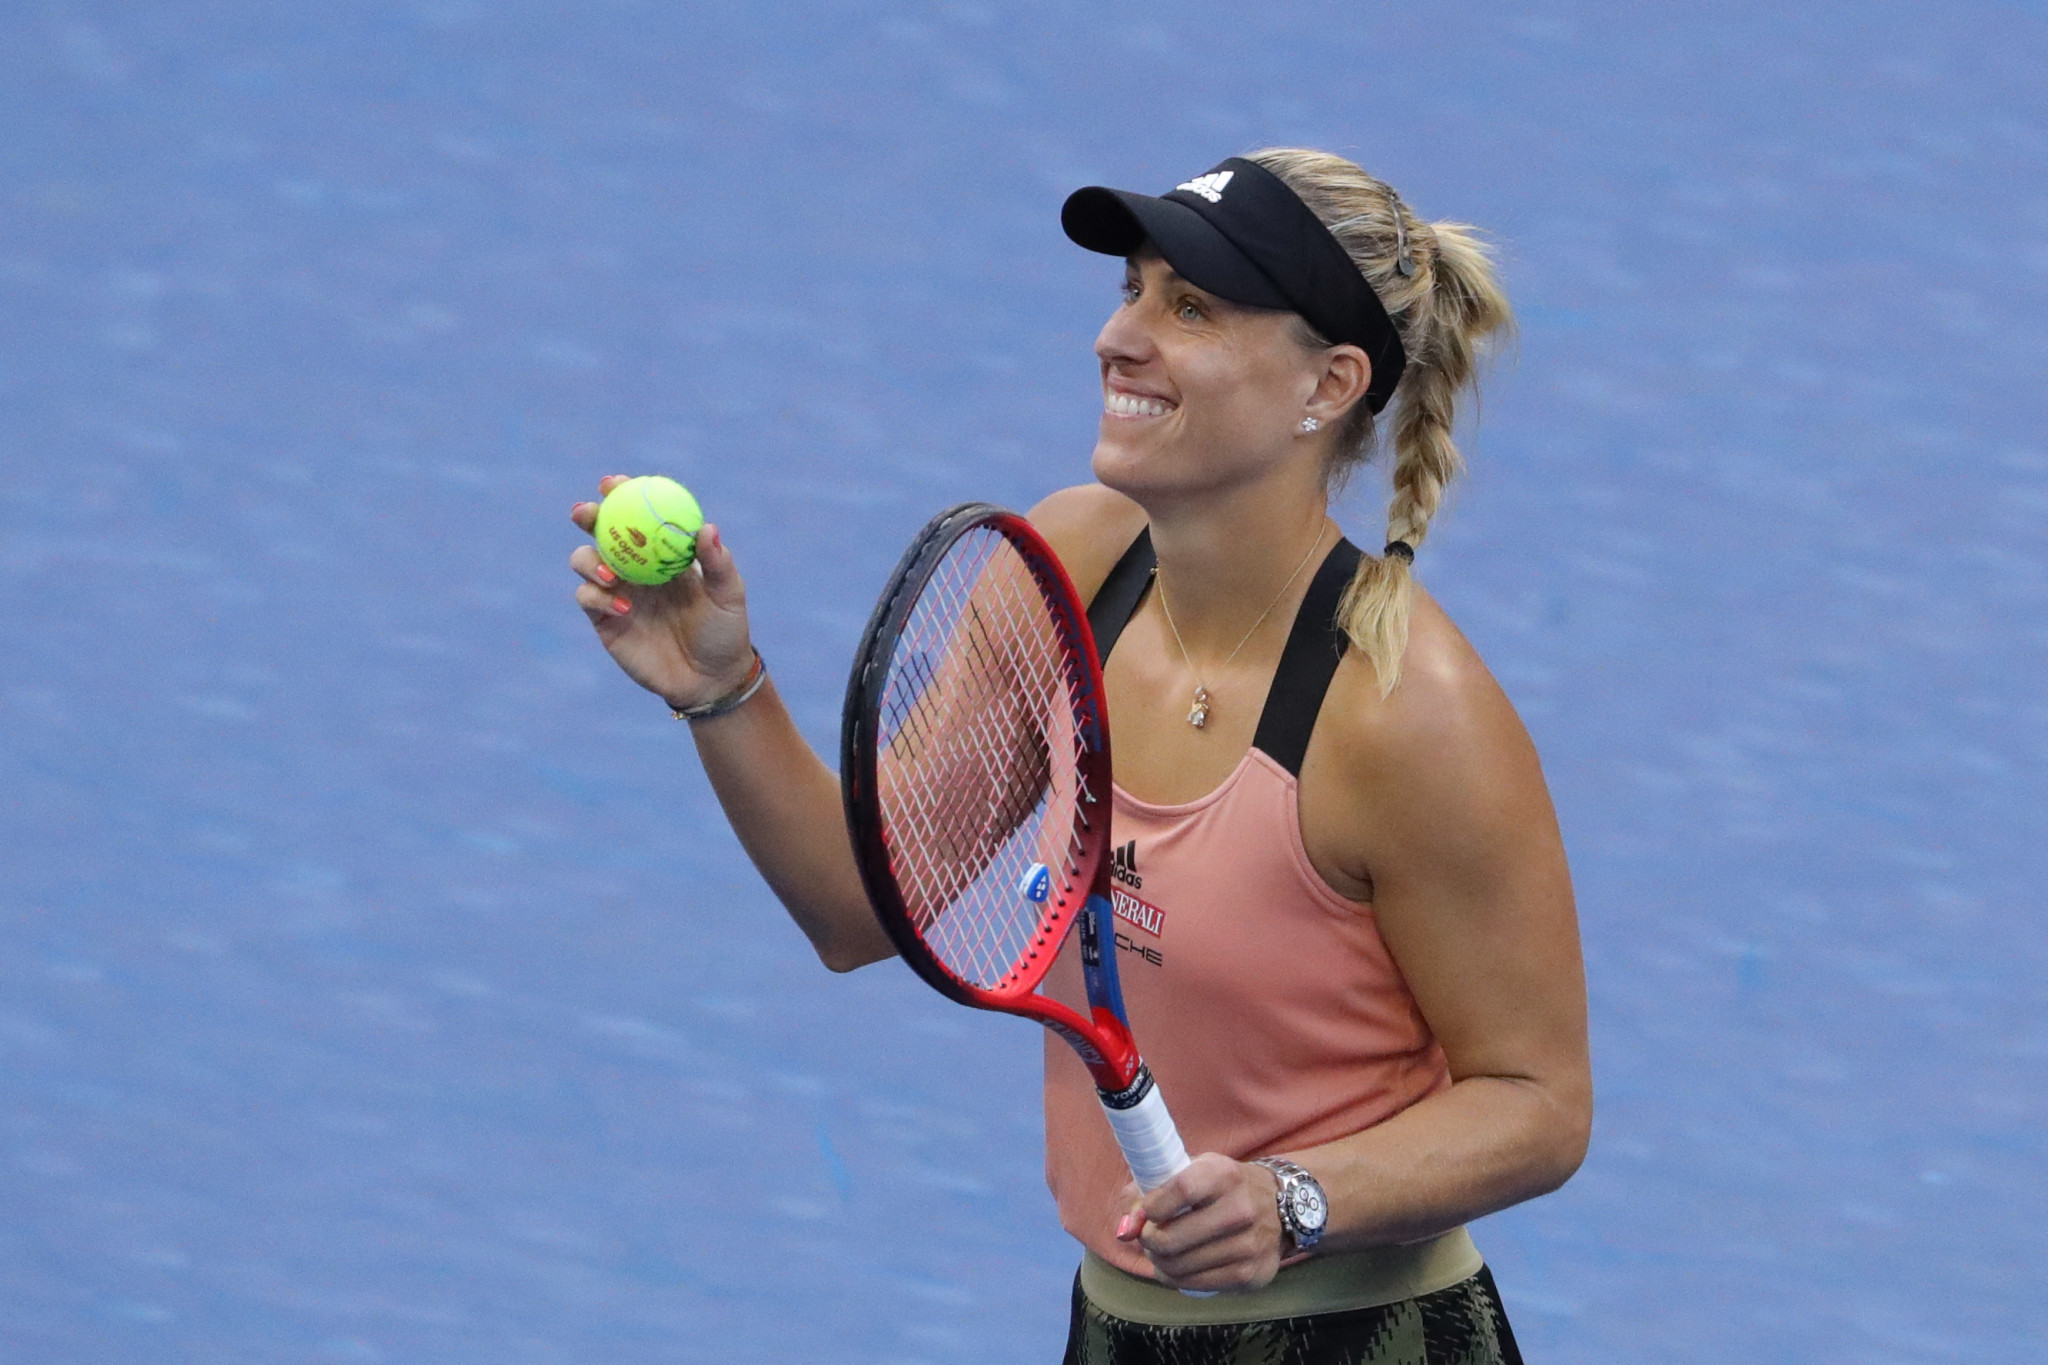 Angelique Kerber - 2016 US Open champion - came out on top in a battle of former champions to reach the fourth round in New York ©Getty Images